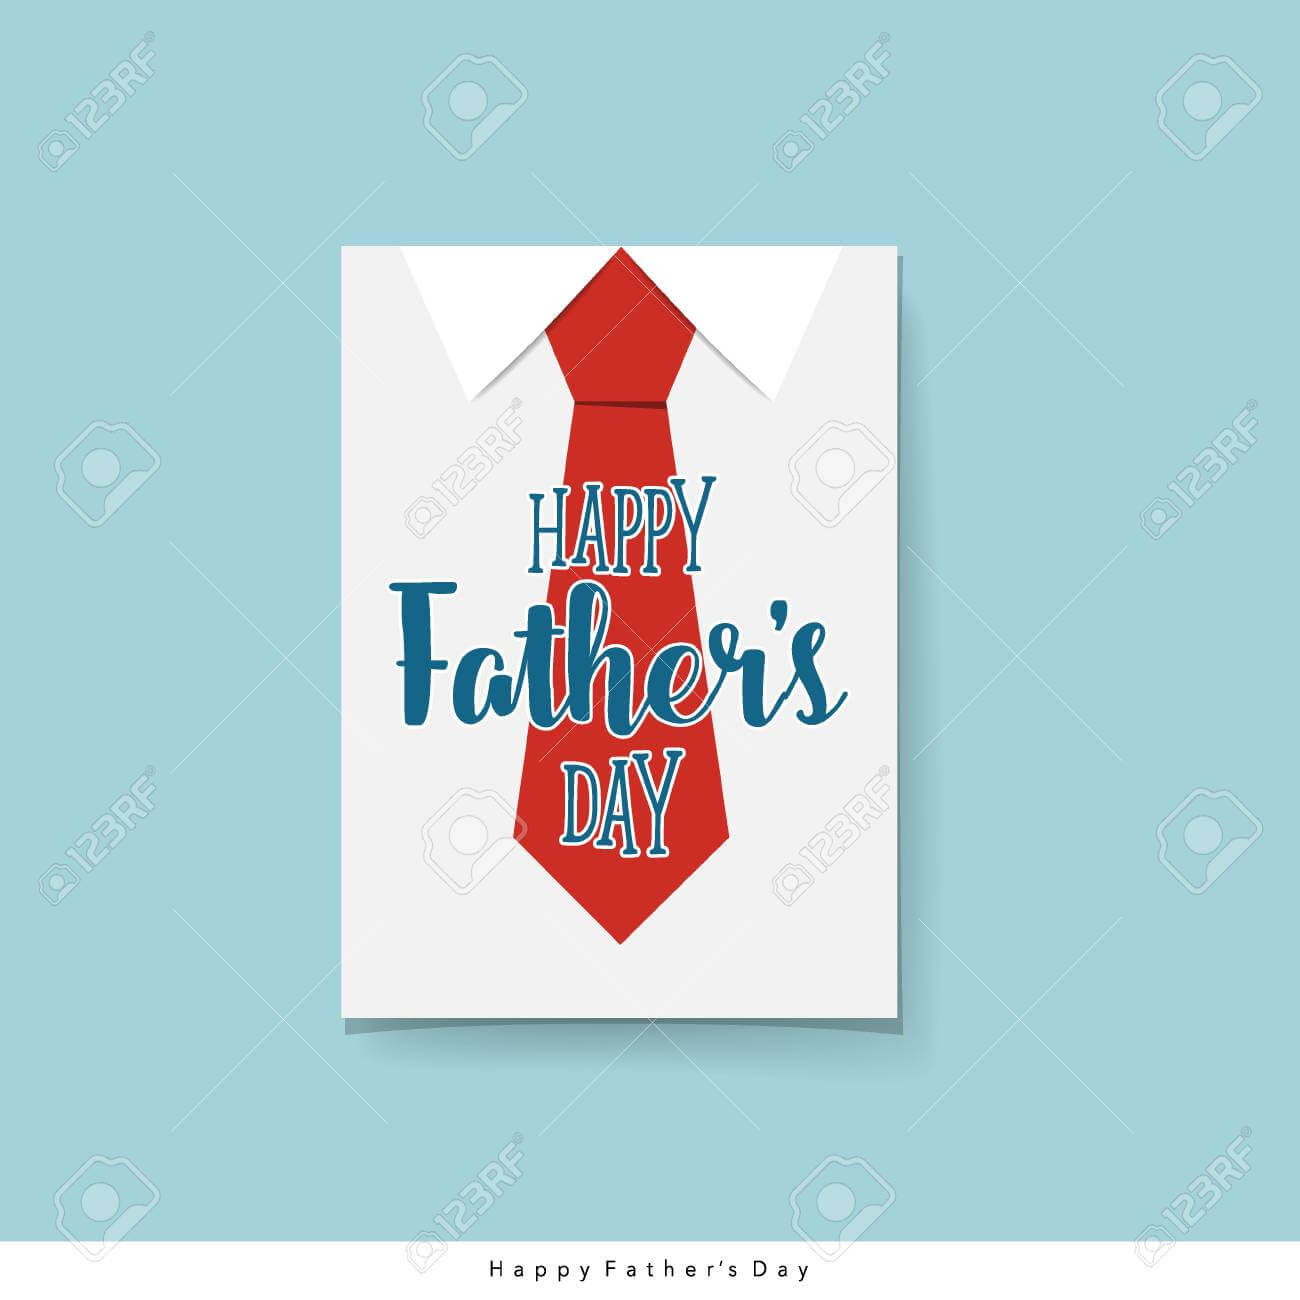 Happy Fathers Day Card Design With Big Tie. Vector Illustration. Intended For Fathers Day Card Template